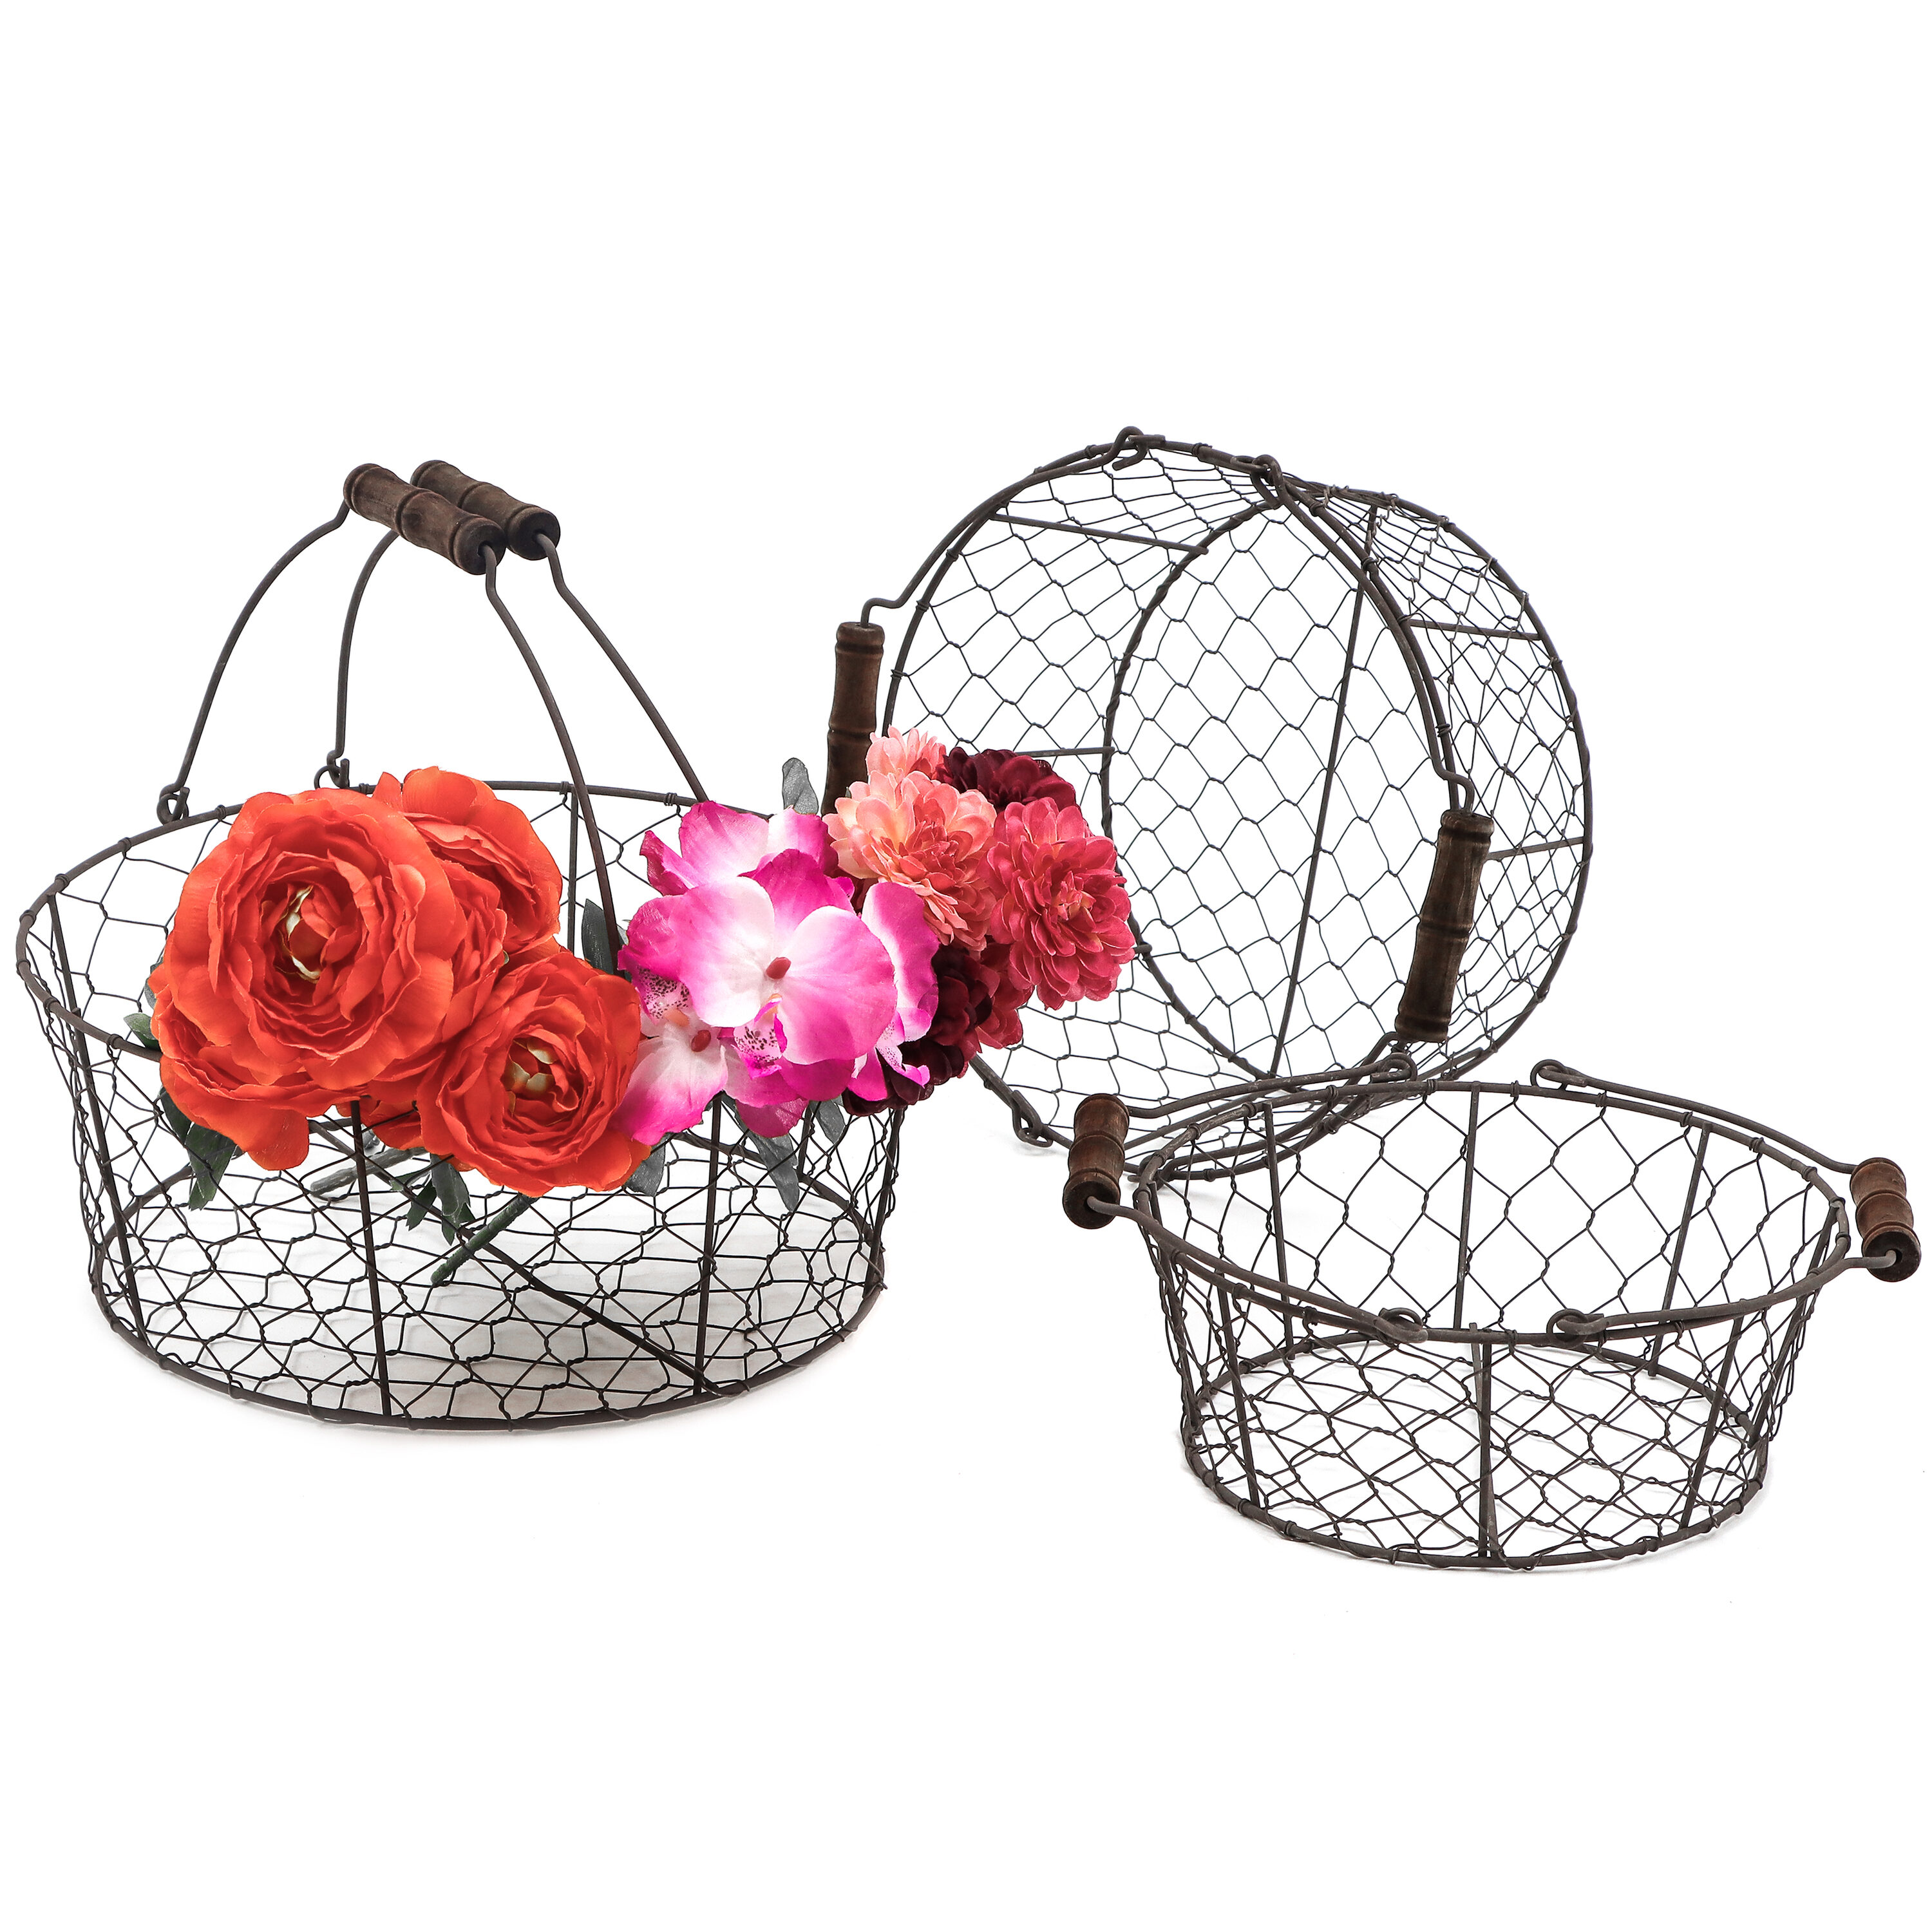 Set of 3 Wire Basket with Wooden Handles - Vintage Style - by Trademark Innovations